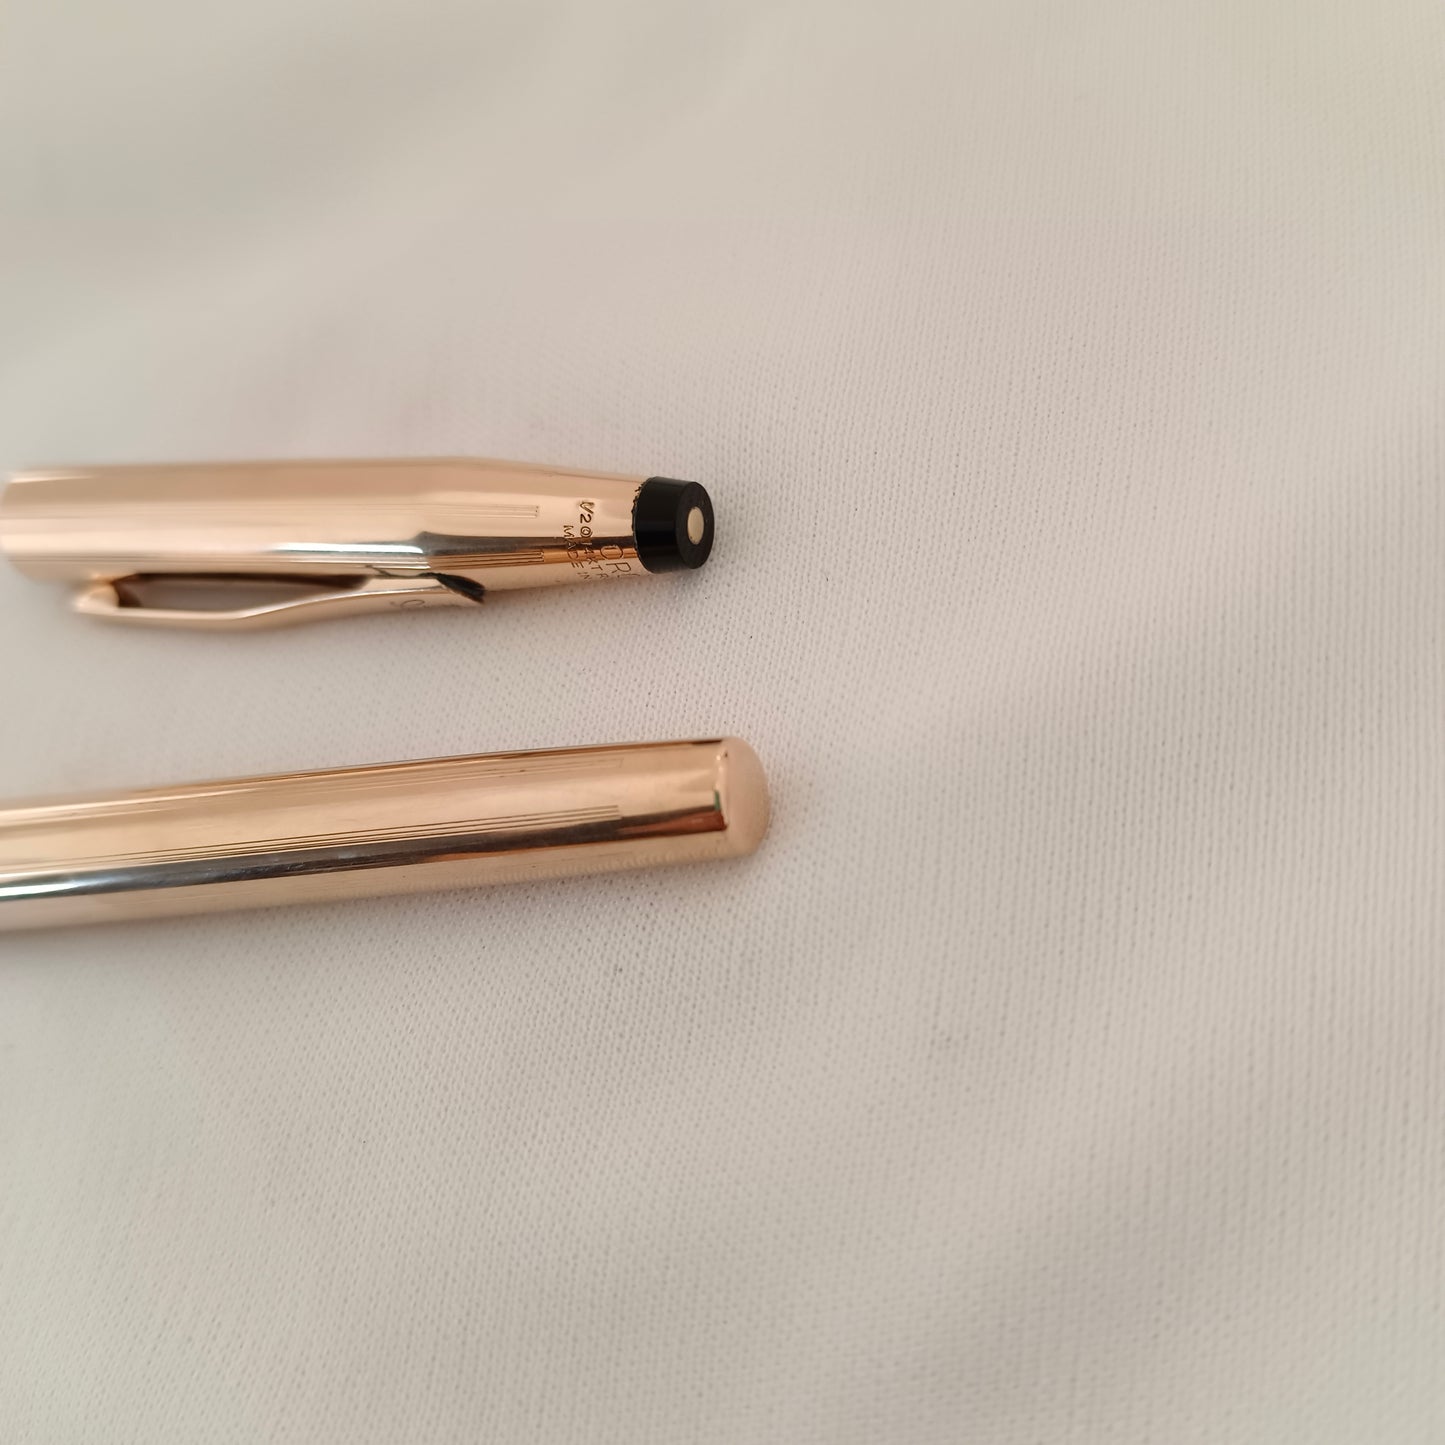 Cross Century 1/20 14kt Rolled Gold Fountain Pen - Made in Ireland